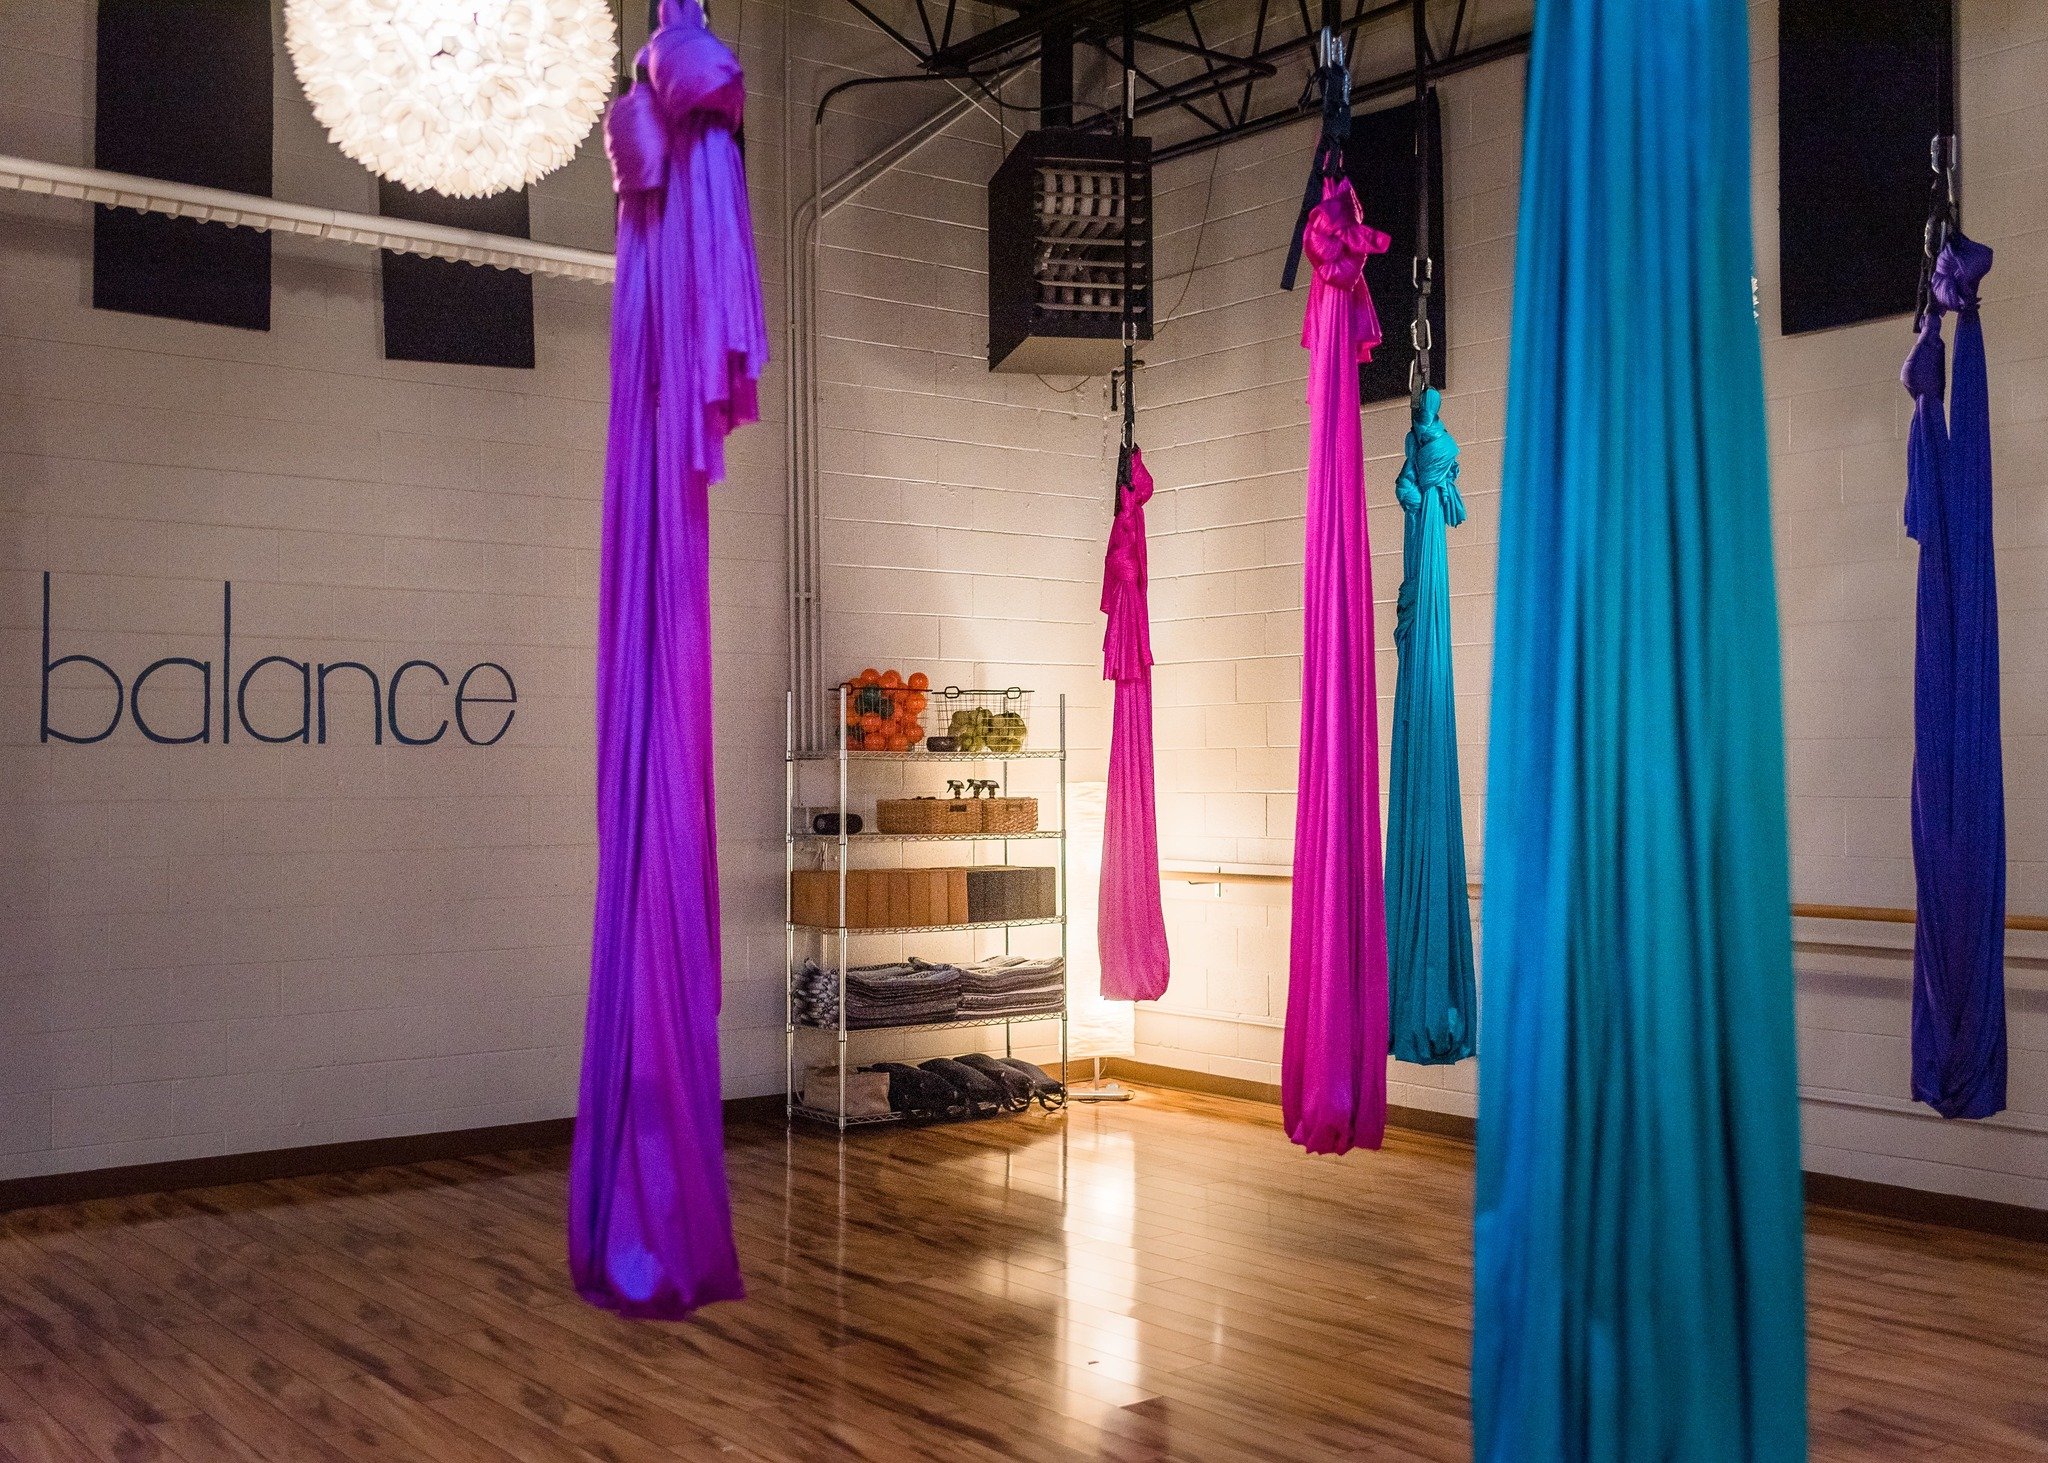 Restorative yoga in the aerial silks - an evening of PURE bliss! Join Farrah on Friday, April 19 at 7pm for 90 minutes of self-nourishment. This practice is designed to help guide you into deep states of relaxation and release for both your mind + bo